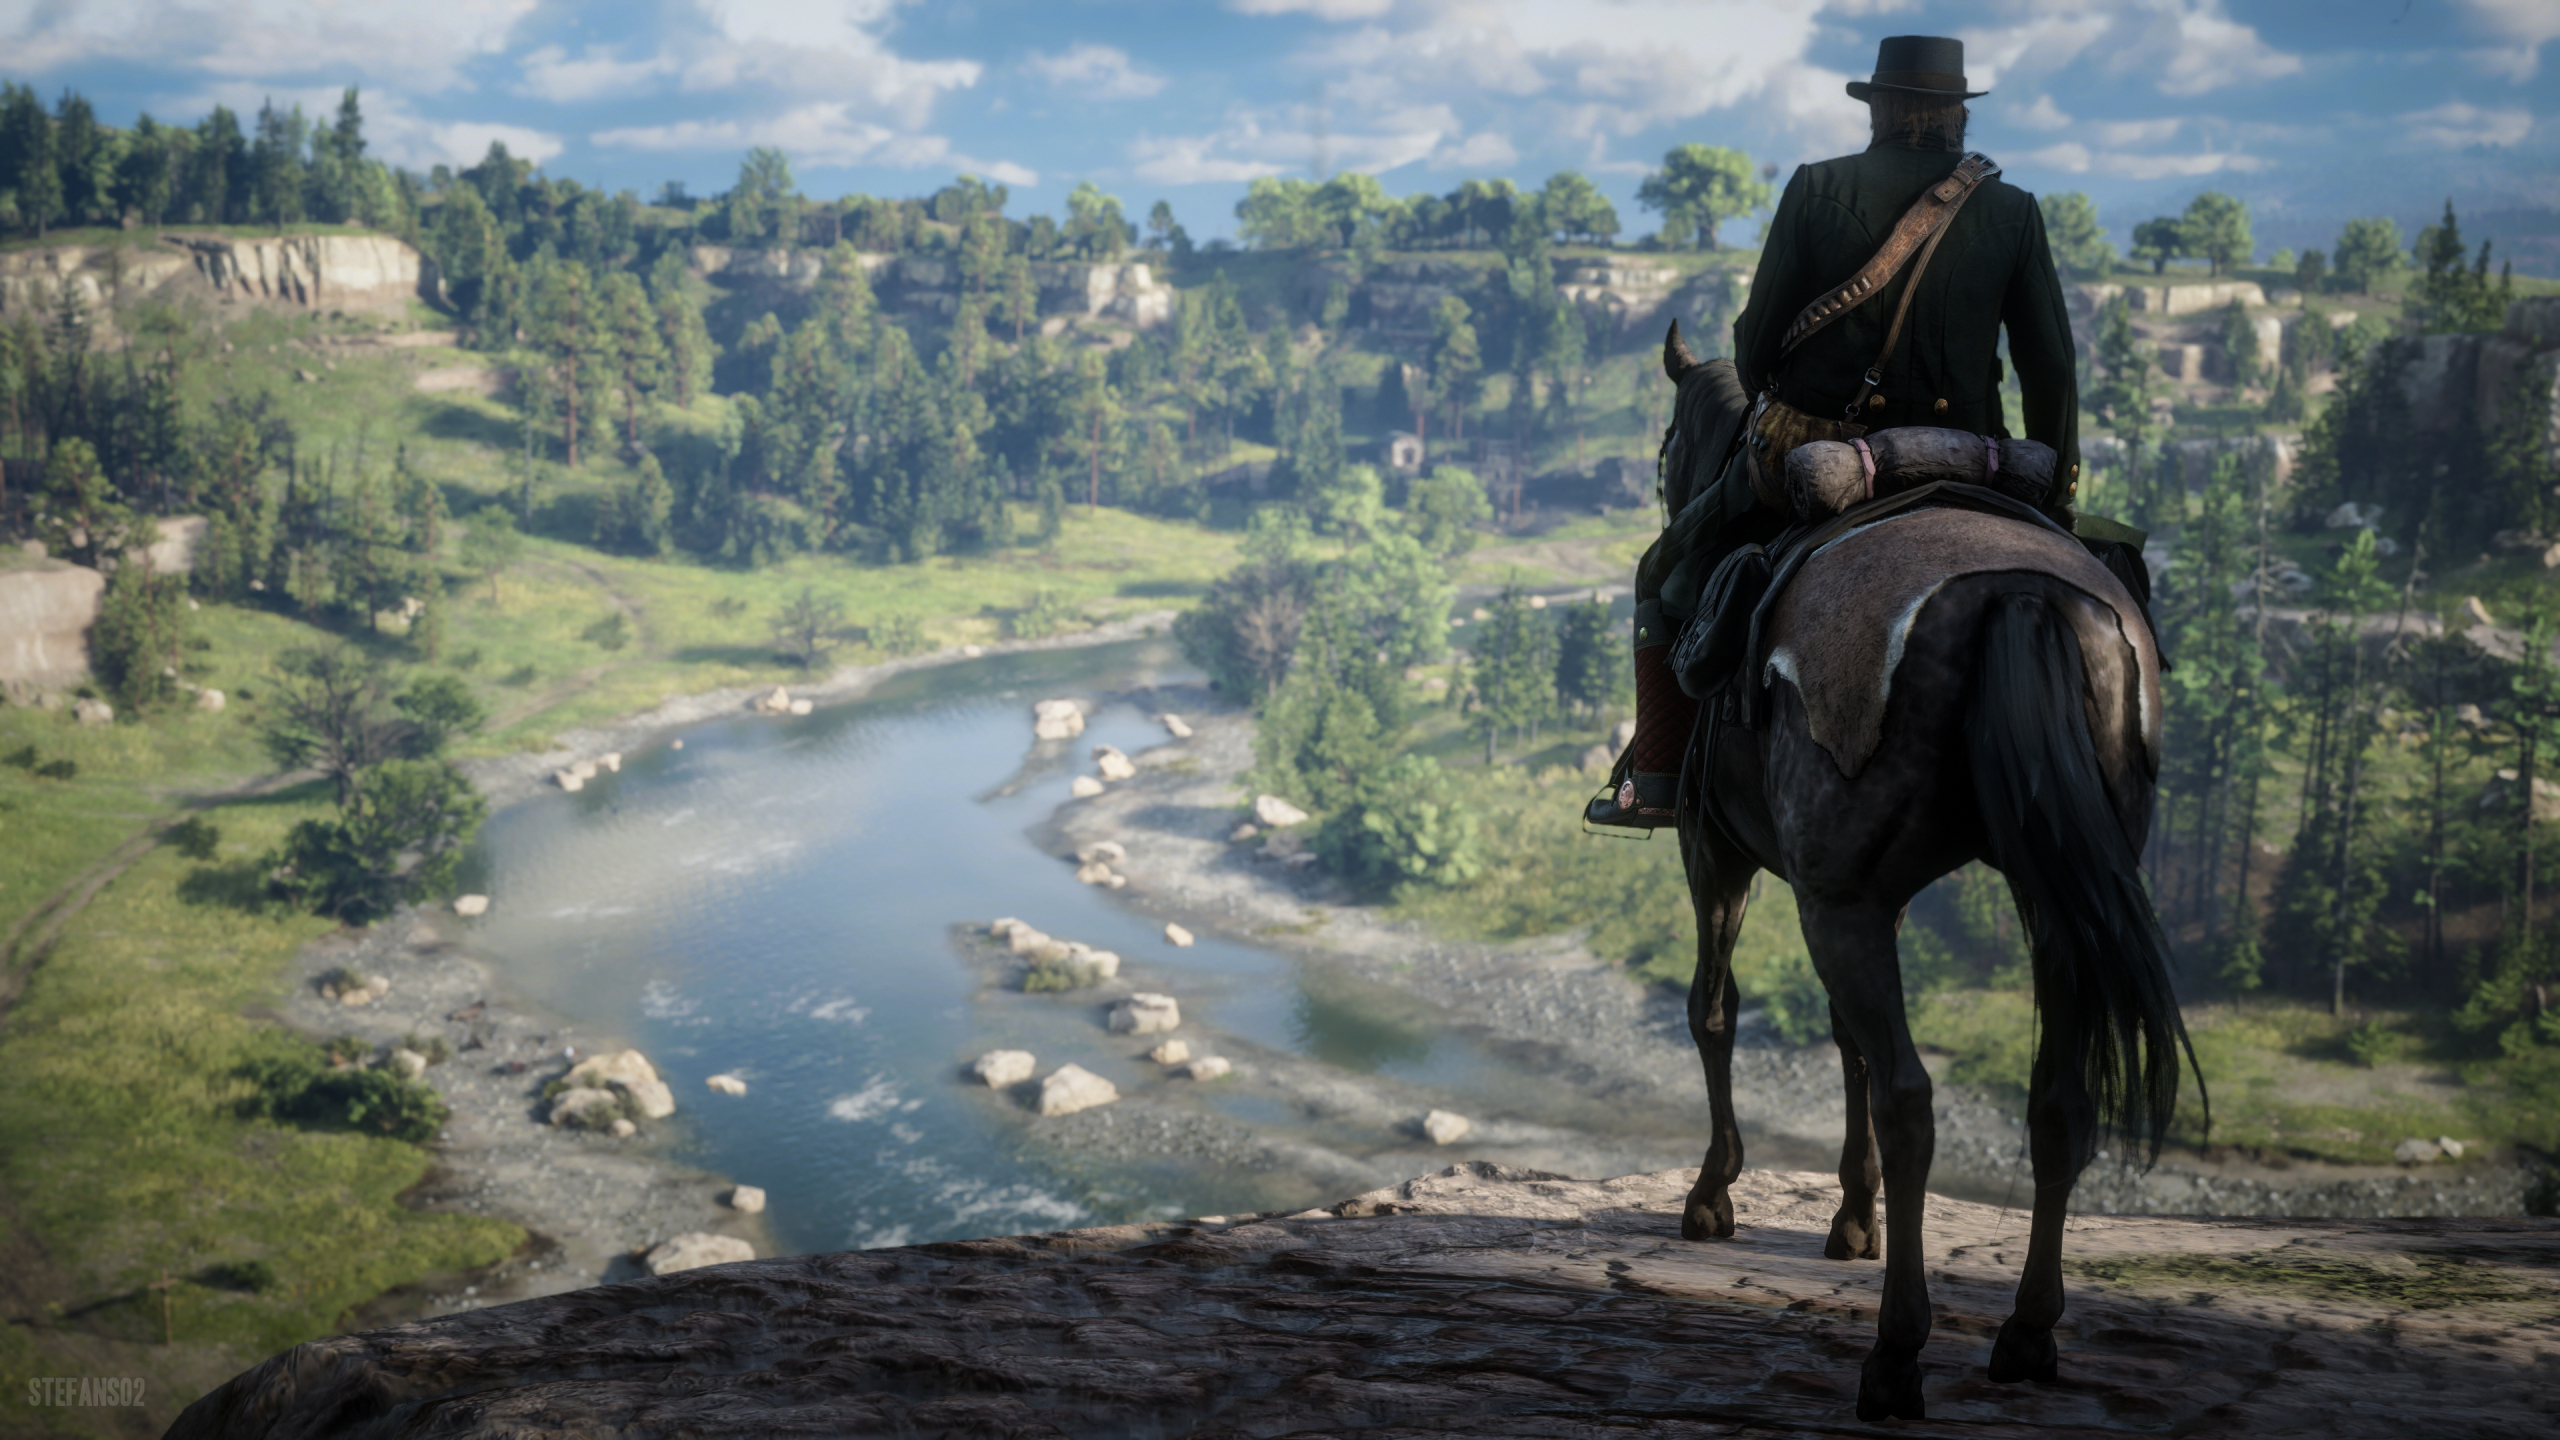 2560x1440 4k Red Dead Redemption 2 Gaming 1440p Resolution Wallpaper Hd Games 4k Wallpapers Images Photos And Background Wallpapers Den